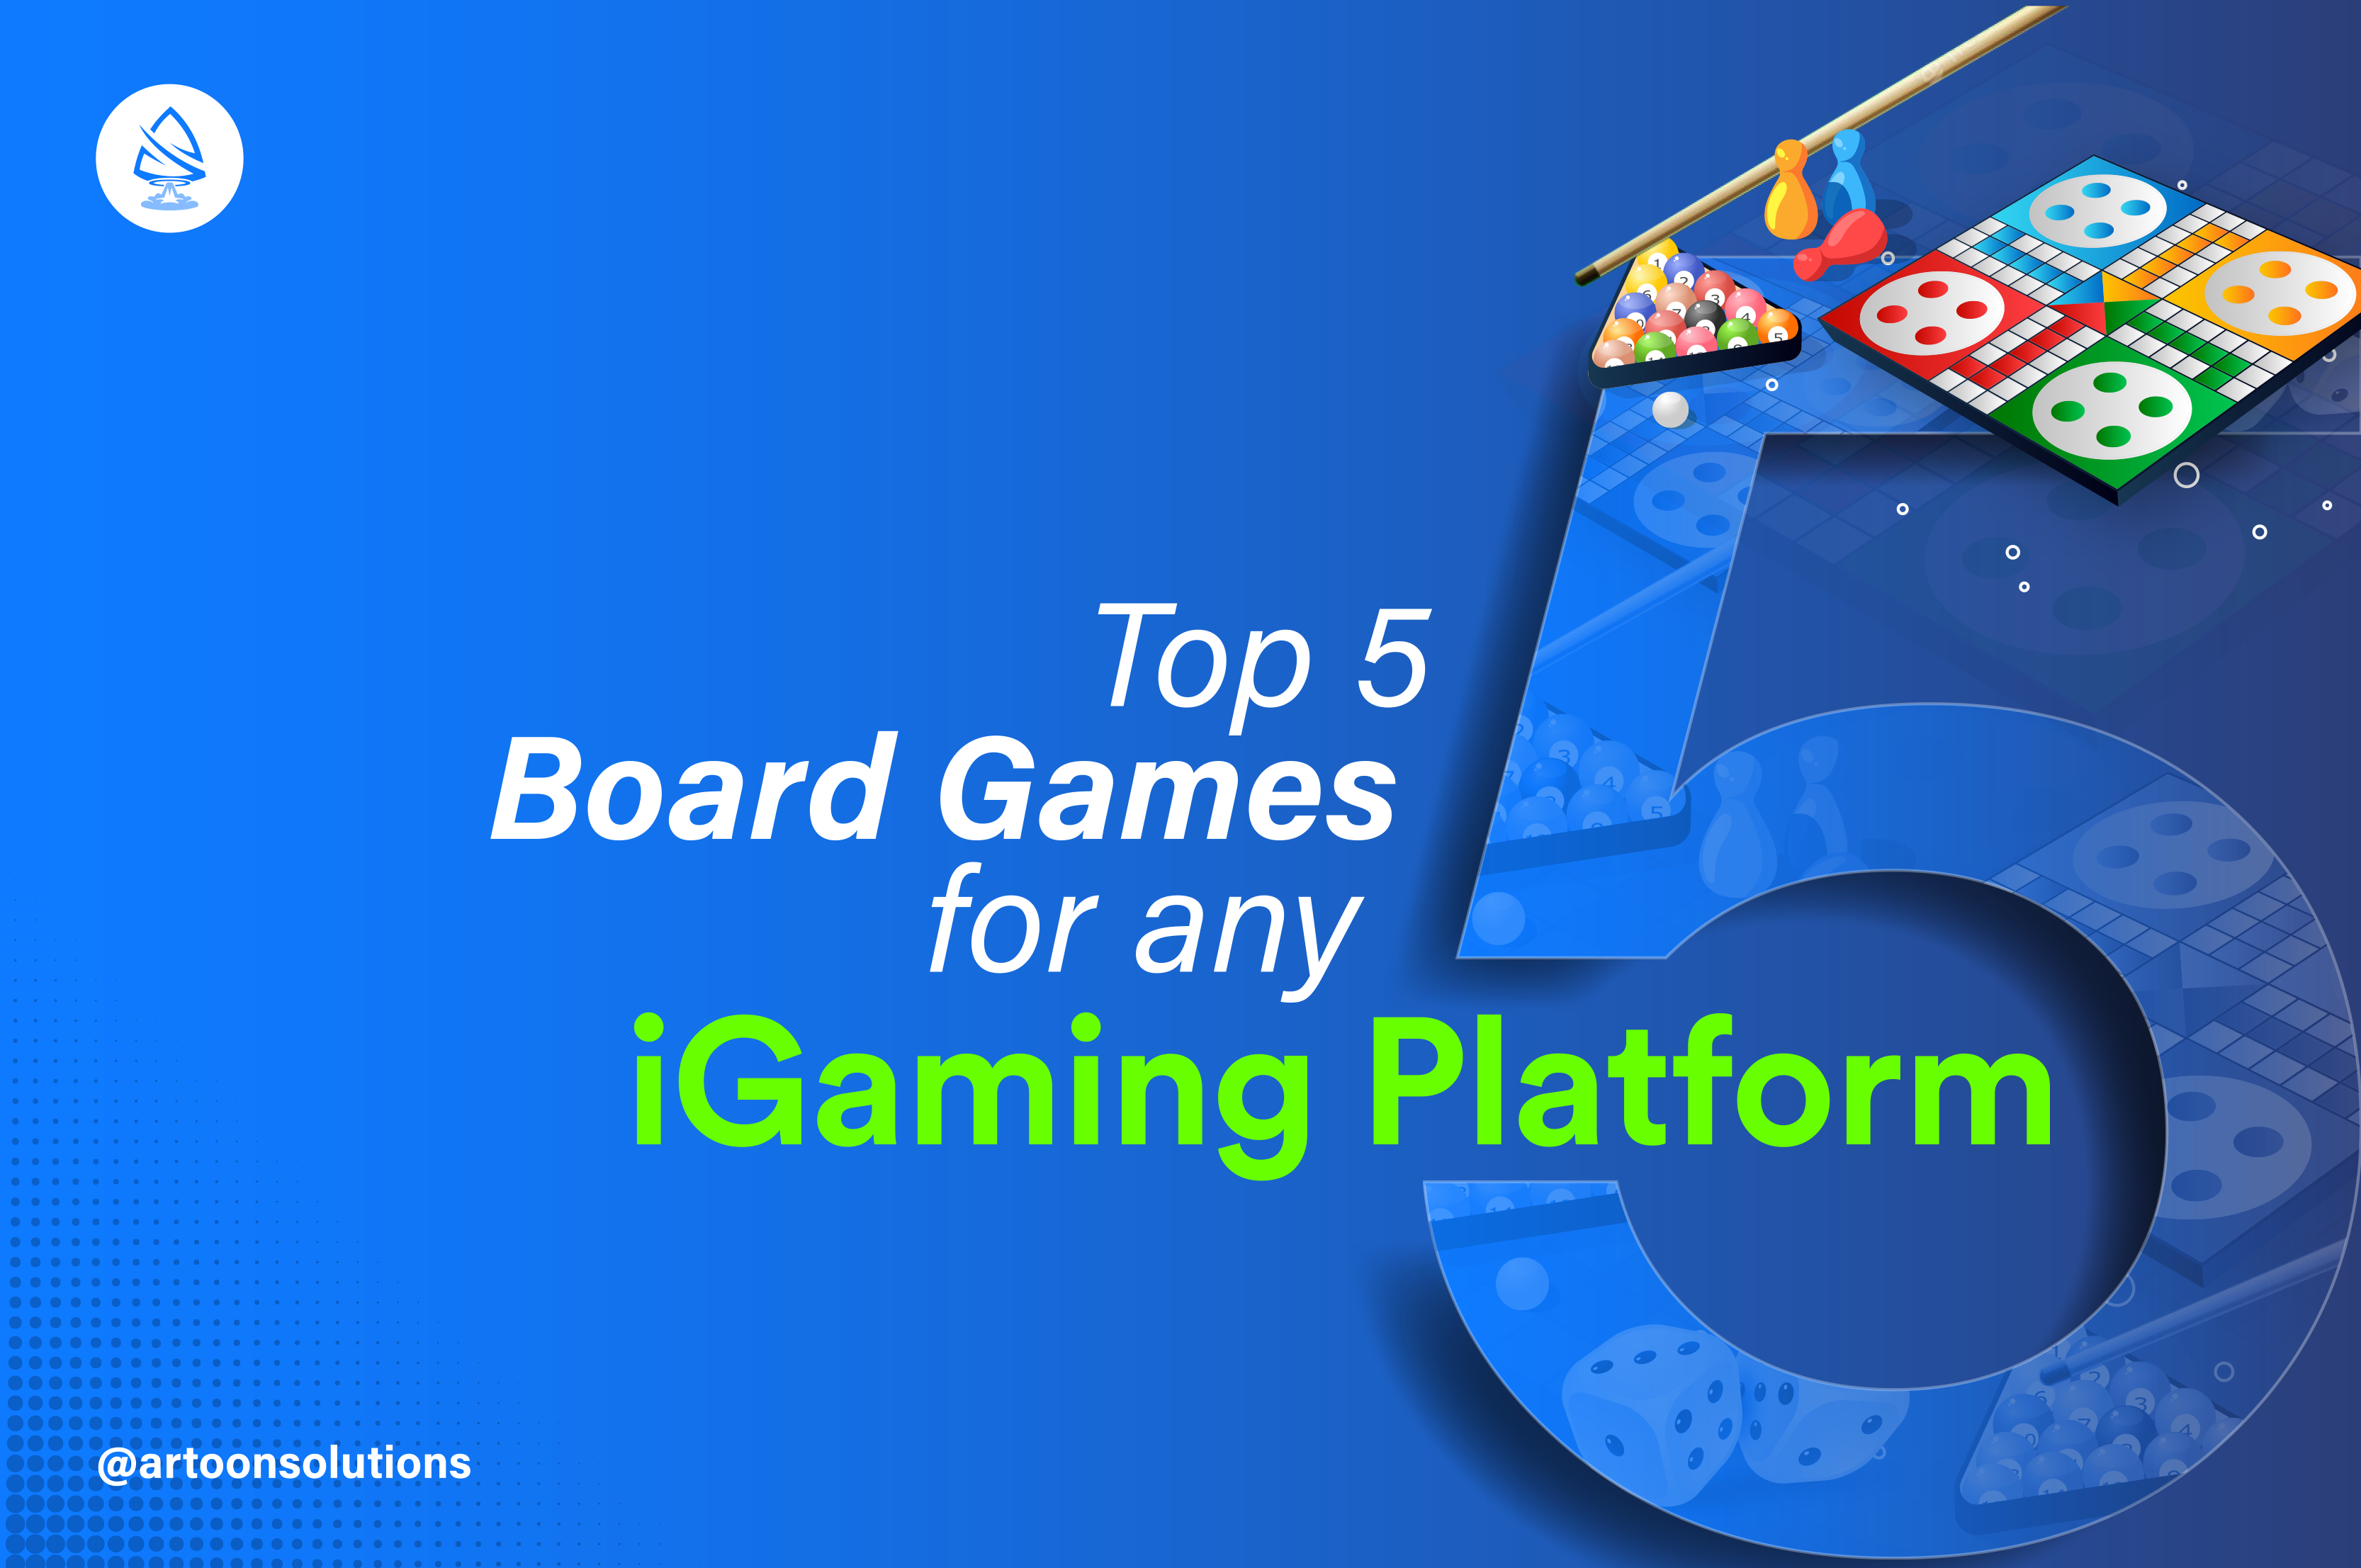 Top 5 Board games for any iGaming platform